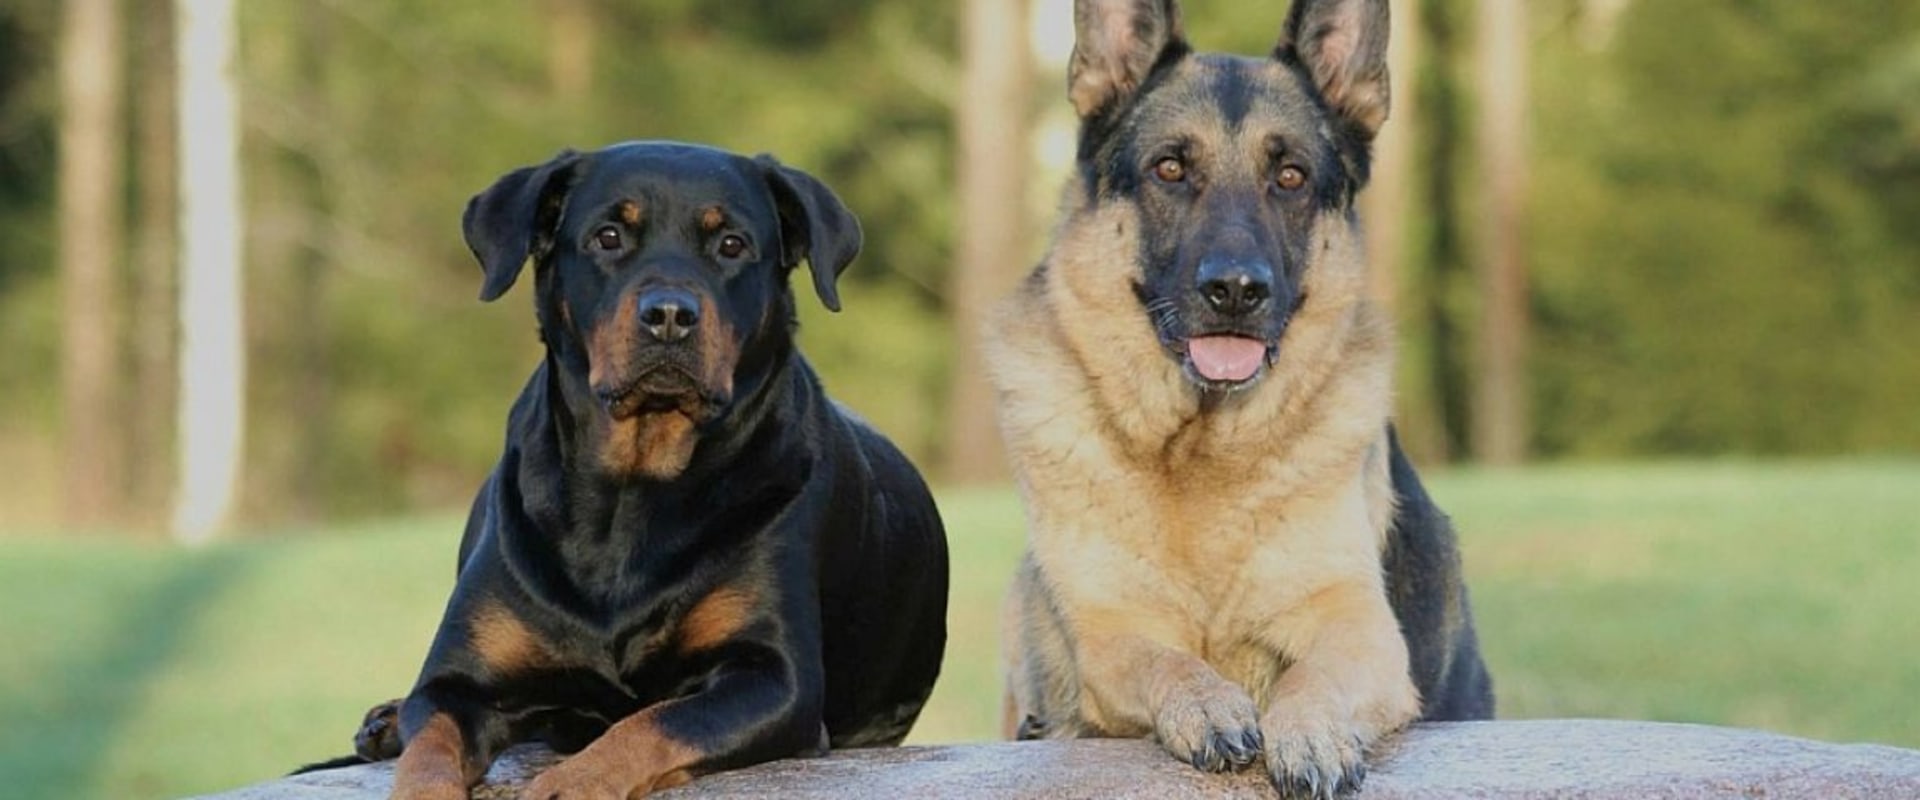 What two dogs make a rottweiler?